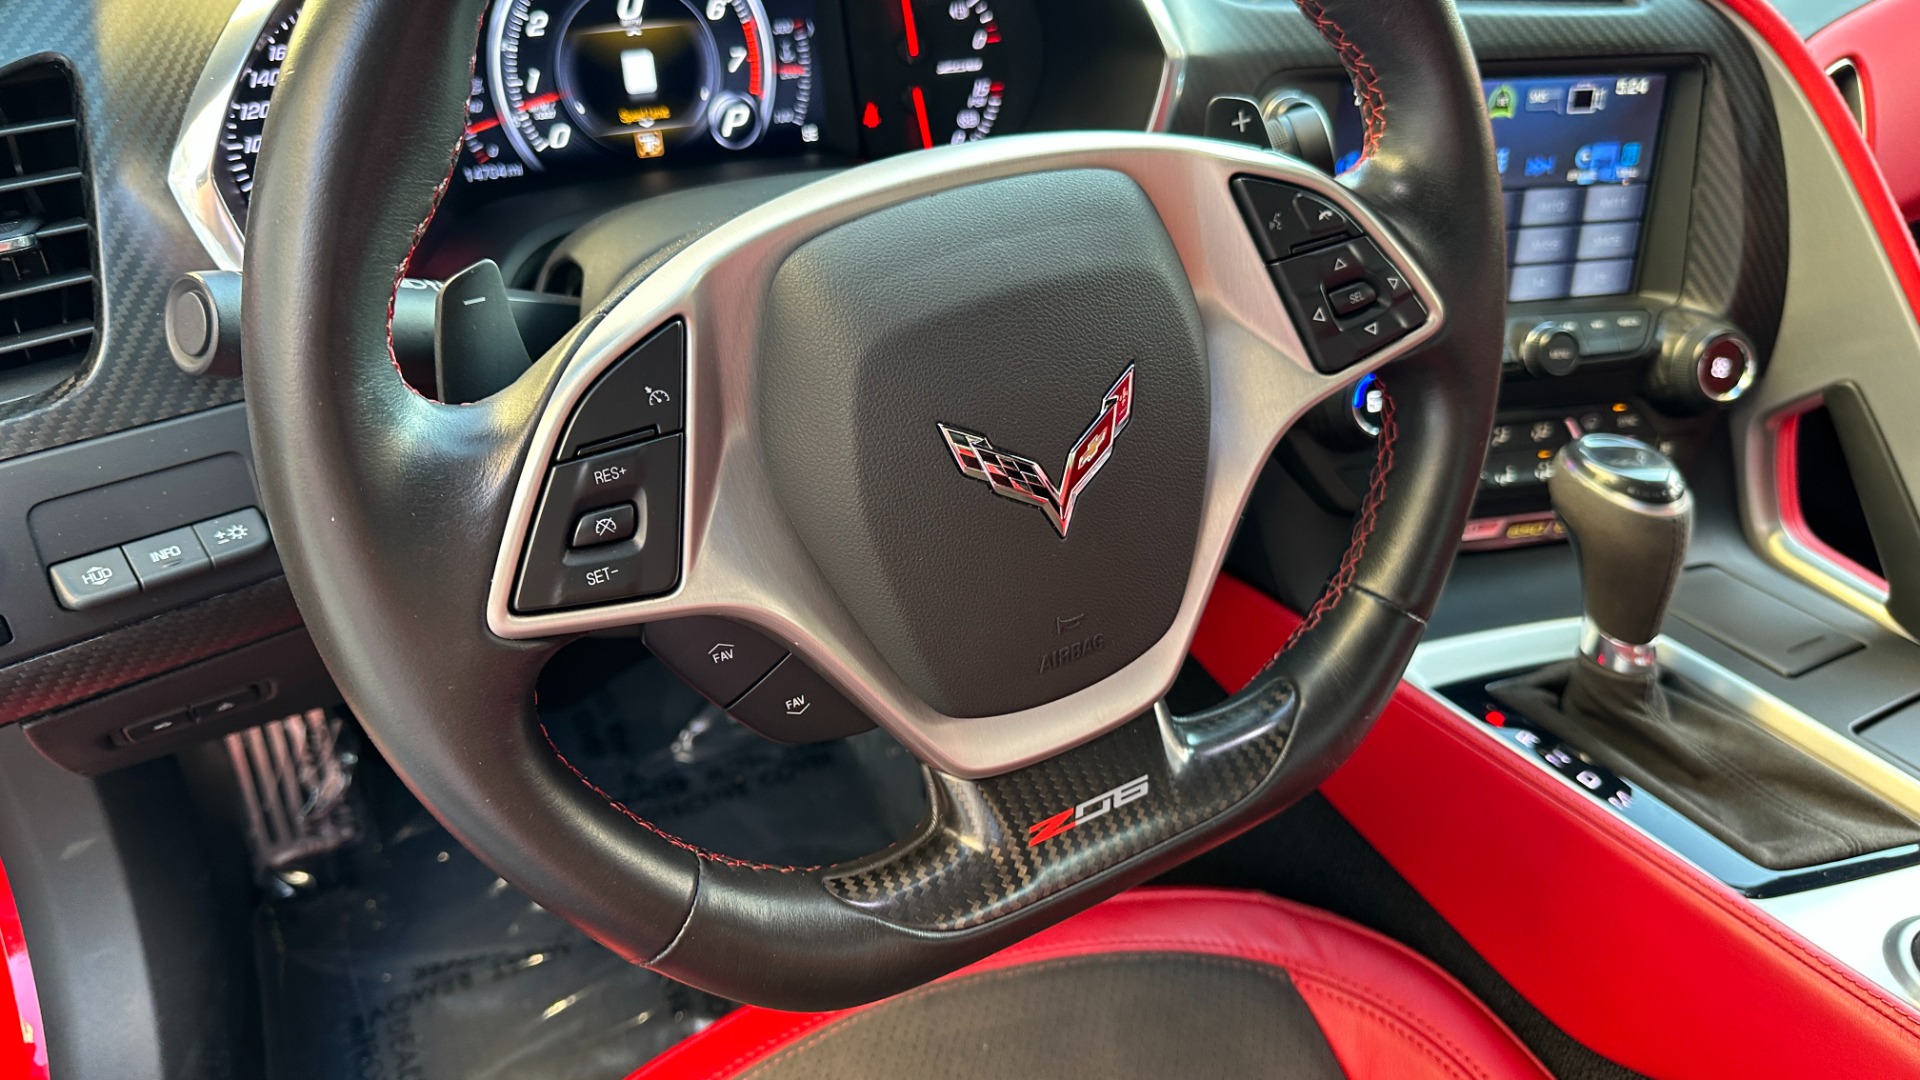 Used 2016 Chevrolet CORVETTE Z06 3LZ / 6.2L SUPERCHARGED 650HP / NAV / BOSE / REARVIEW for sale Sold at Formula Imports in Charlotte NC 28227 19